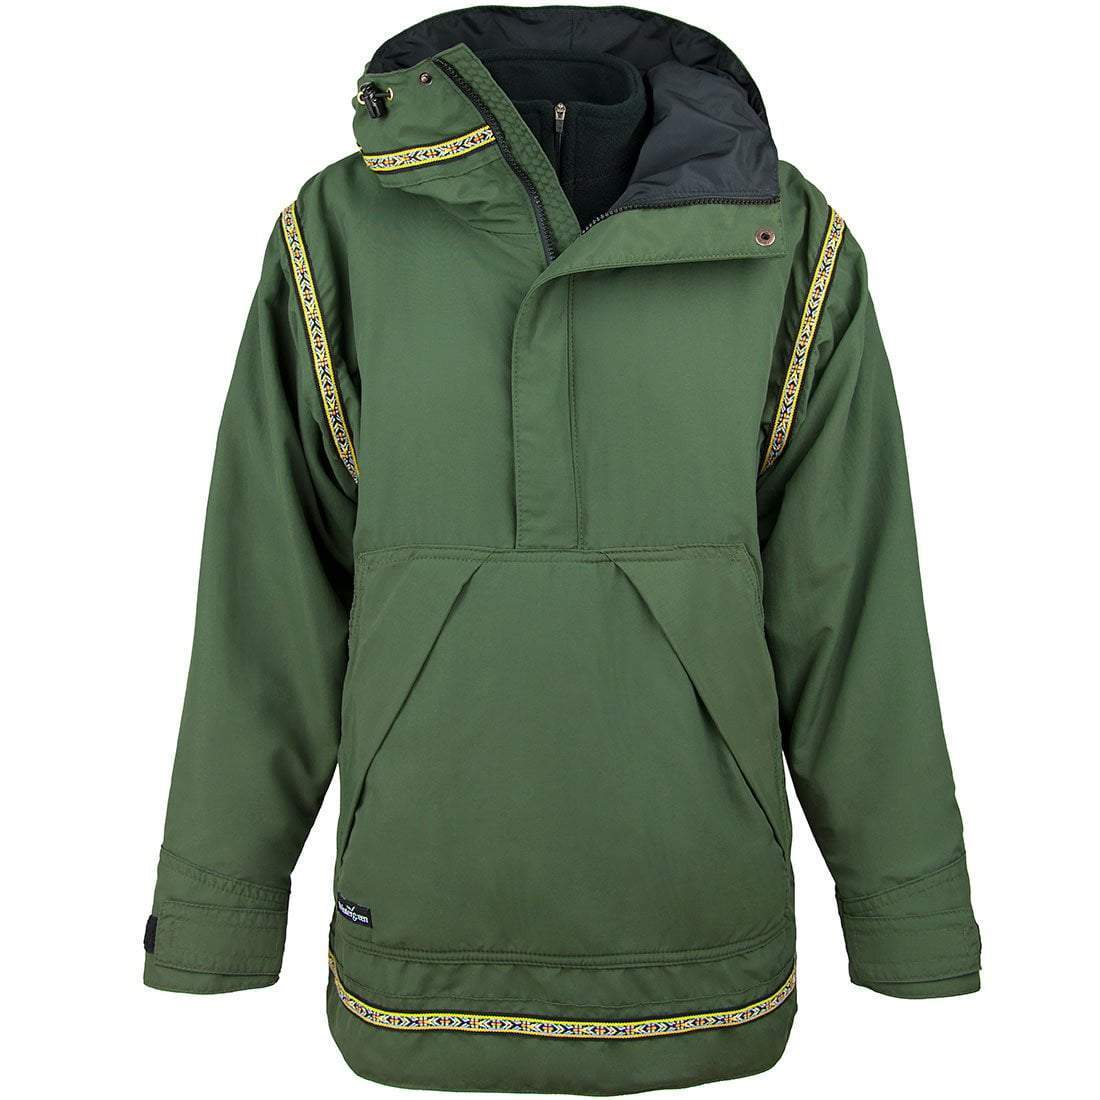 Expedition Shell Anorak Partial Zip (Women's))-Made in Ely, MN.